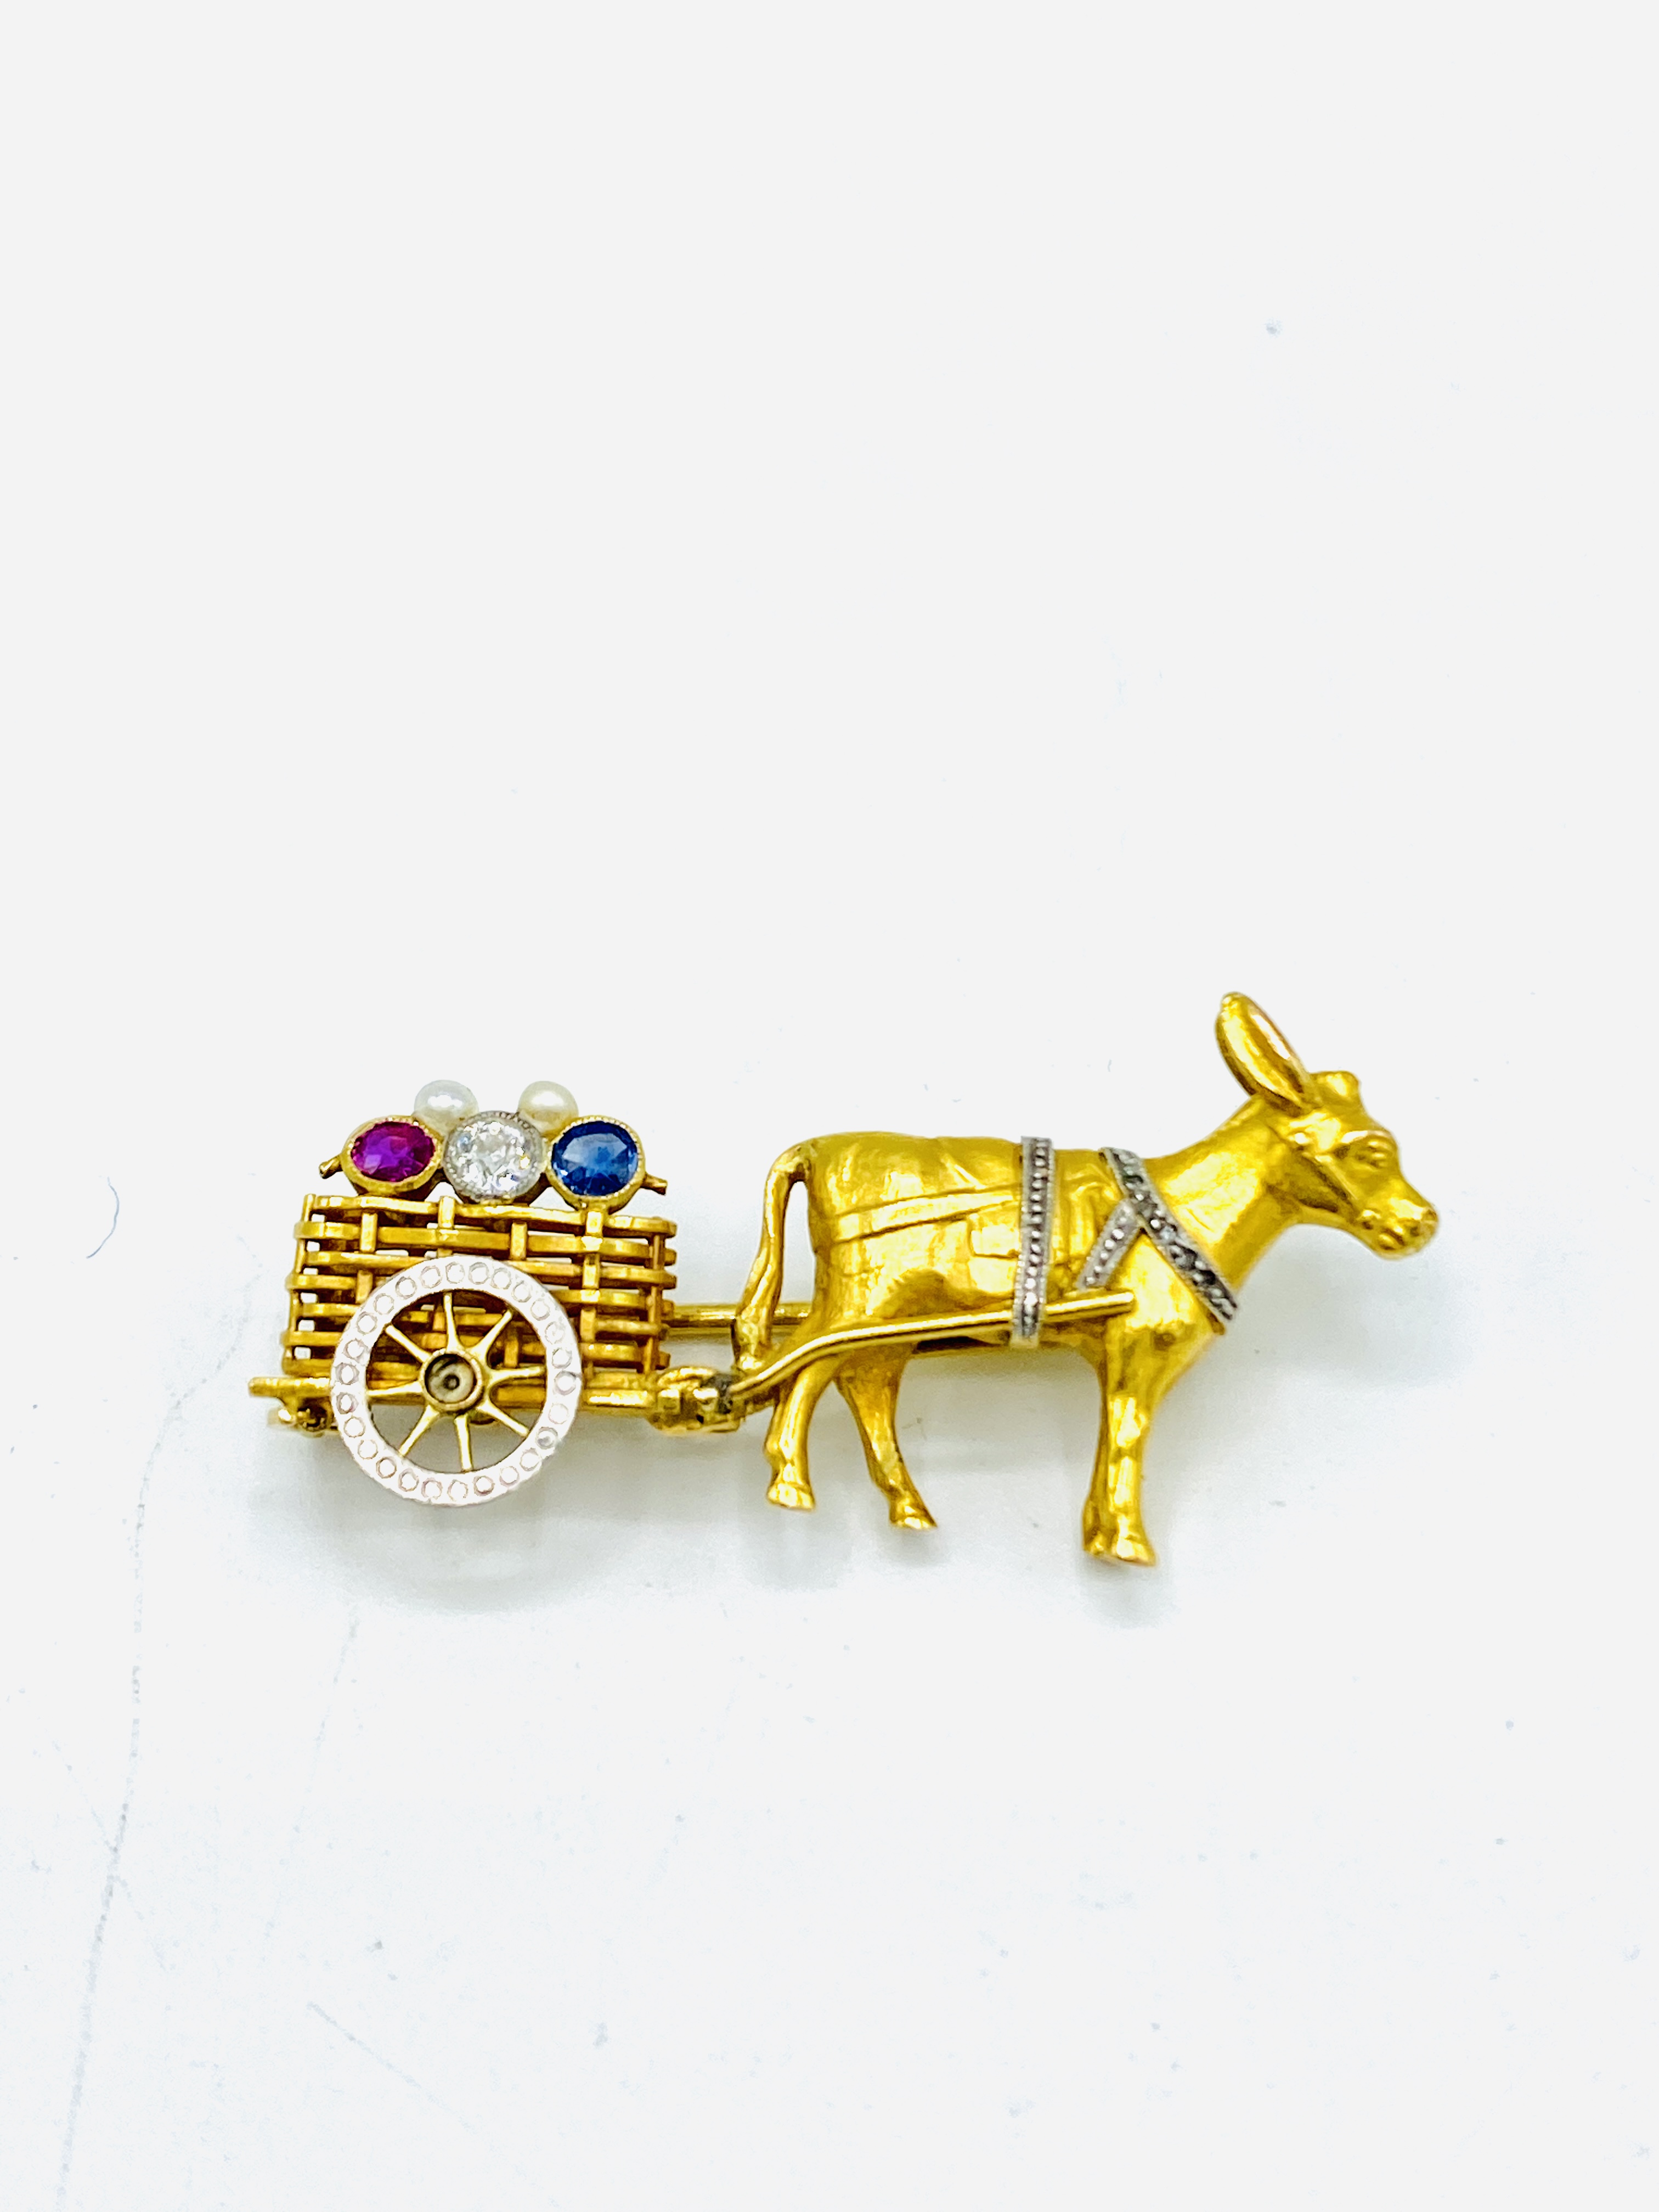 Gem set brooch in the style of a donkey and cart